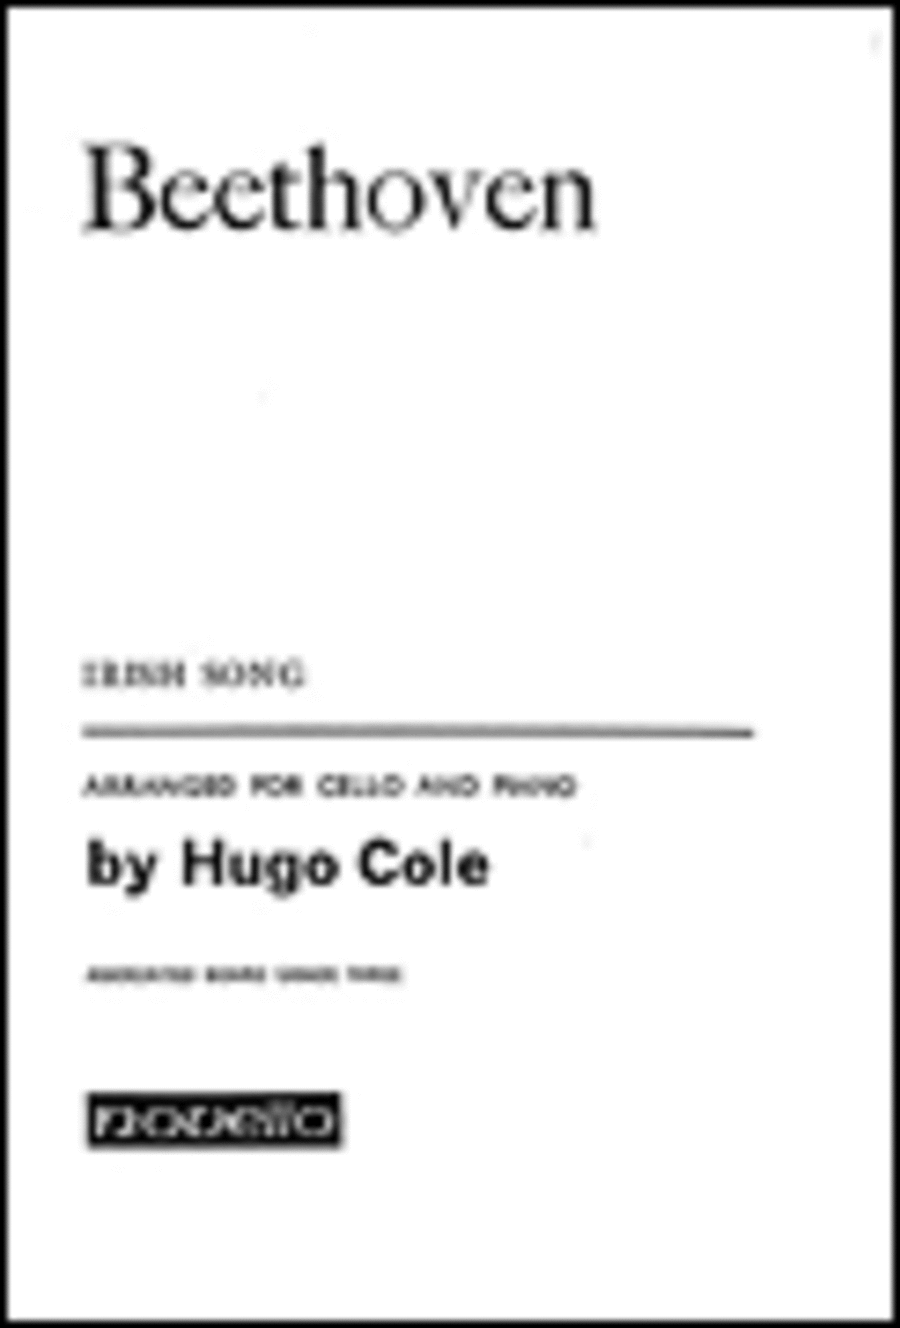 Beethoven: Irish Song for Cello with Piano accompaniment